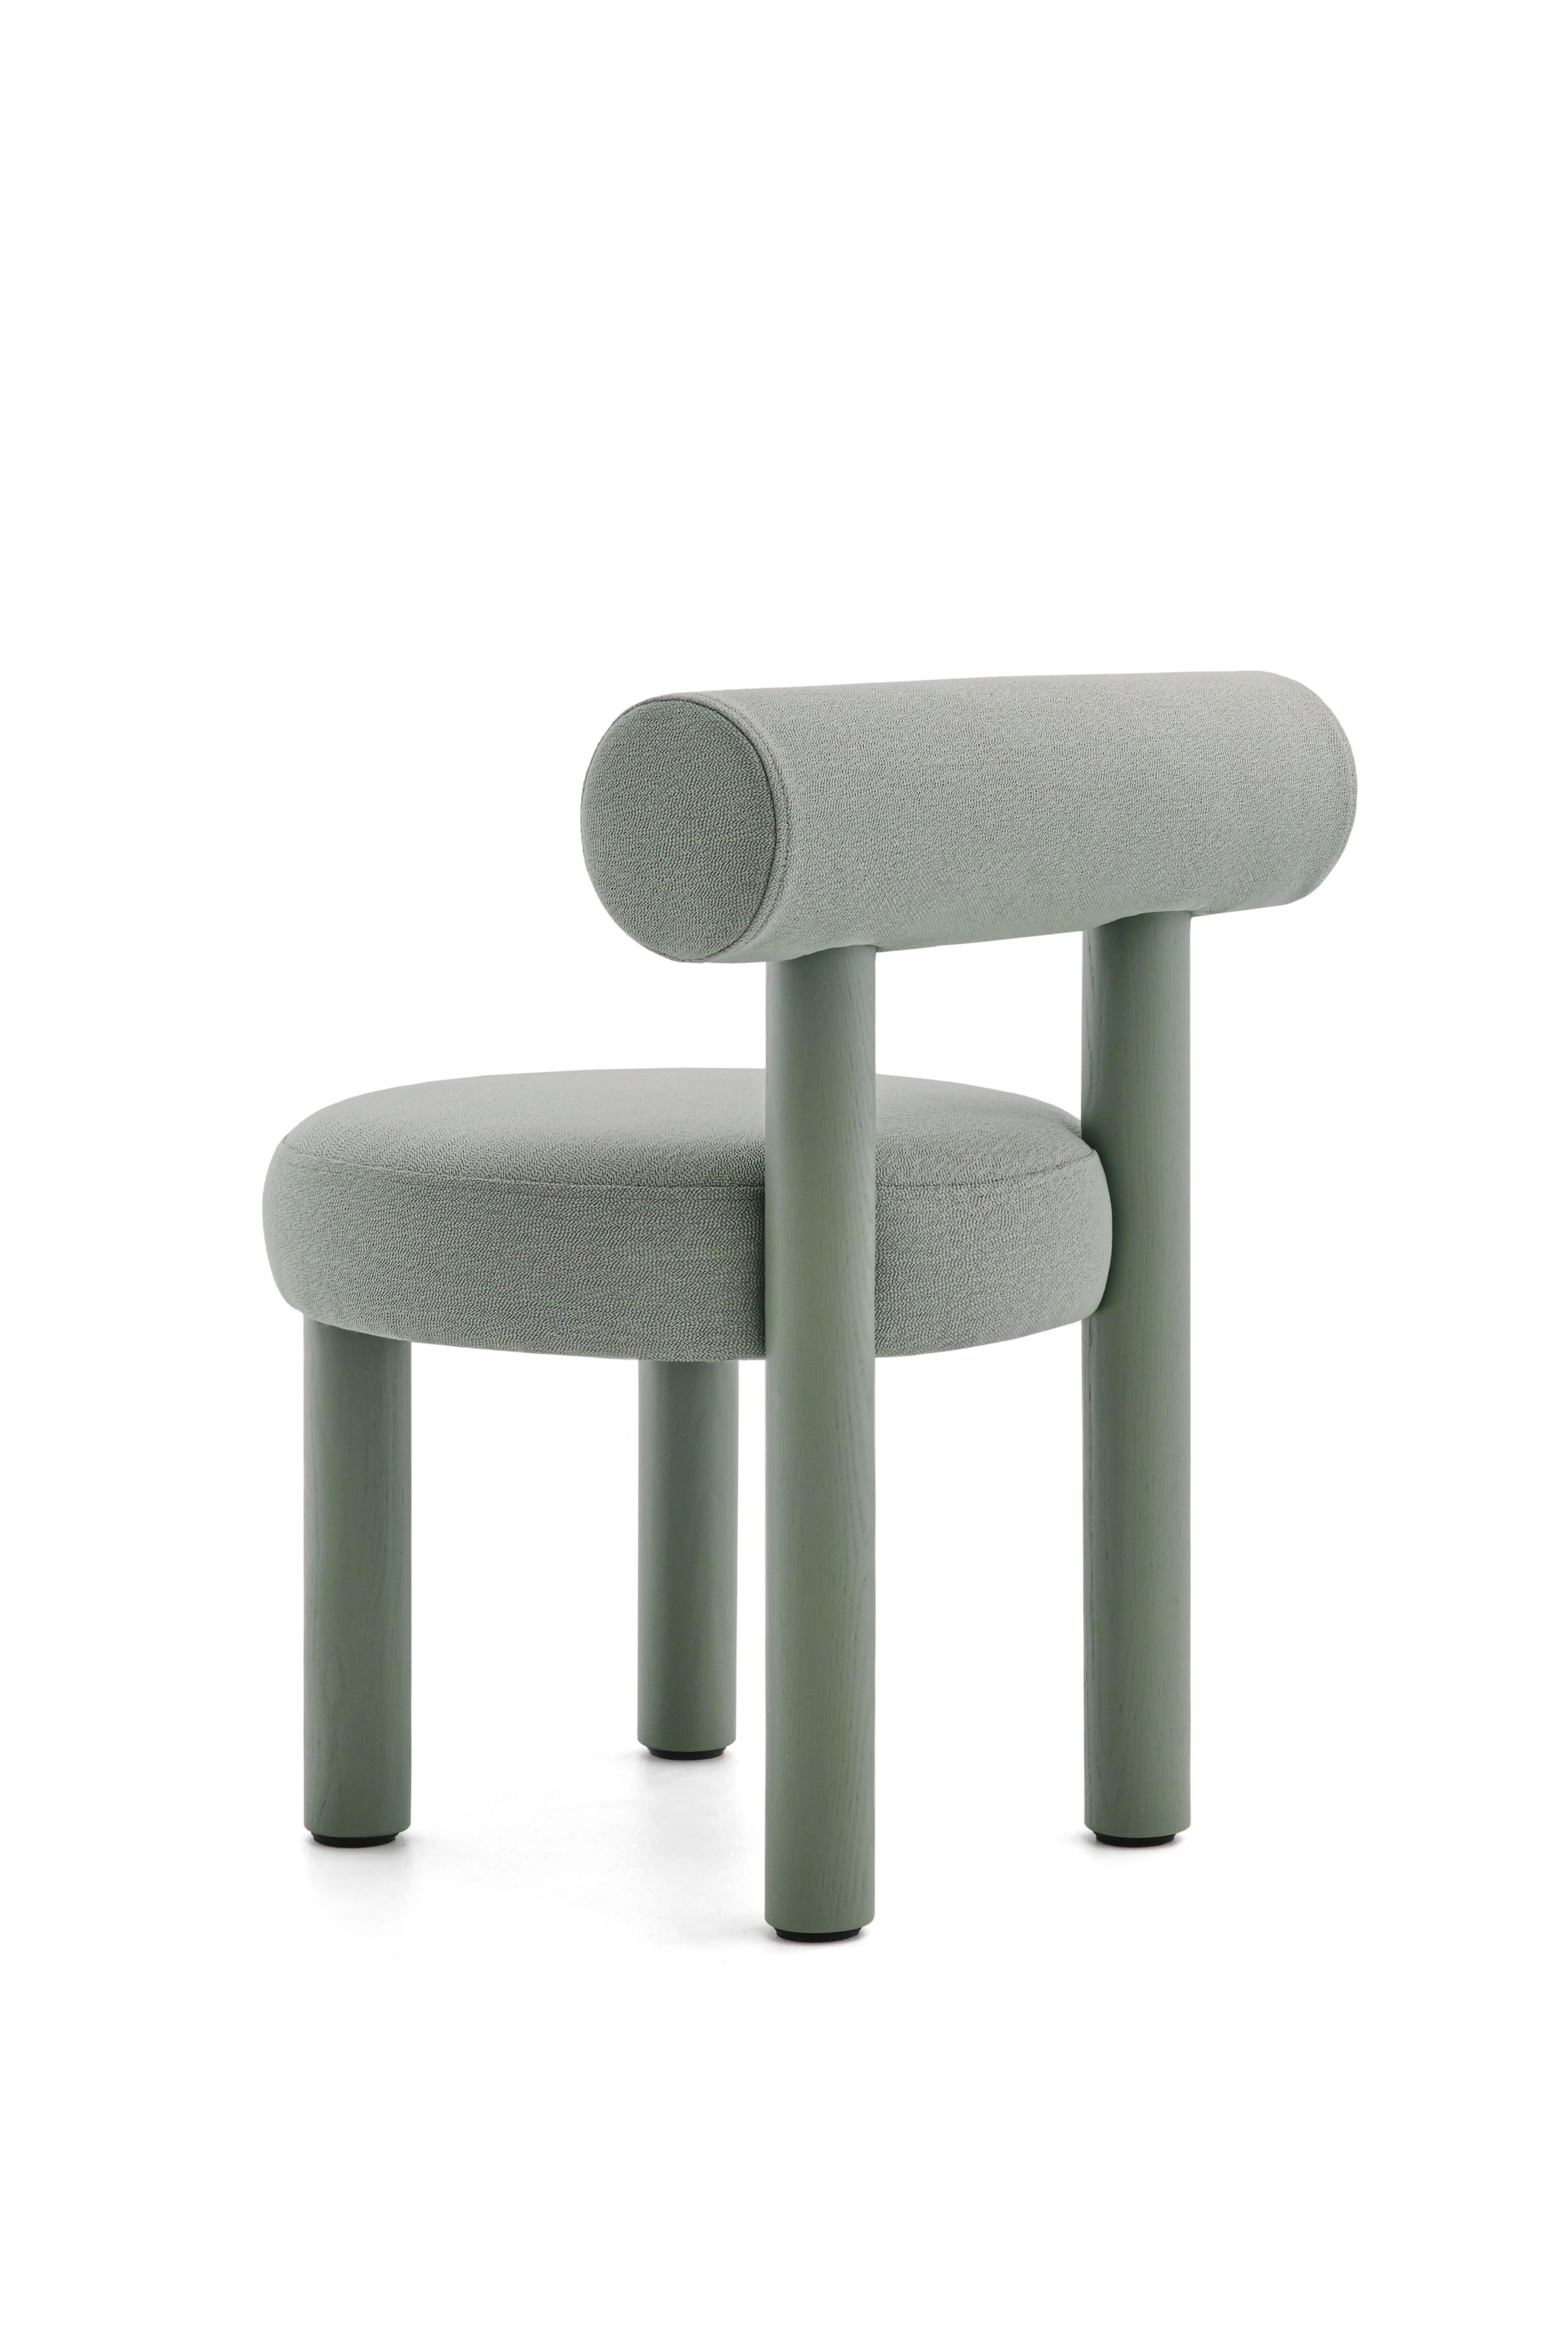 Chair Gropius CS2

Designer: Kateryna Sokolova

Model in the main picture Savoy FR, Arco Rohi Aqua

Dimensions:
Height: 74 cm / 29,13 in
Width: 57 cm / 22,44 in
Depth: 57 cm / 22,44 in
Seat height: 47 cm / 18,11 in

New NOOM furniture collection is